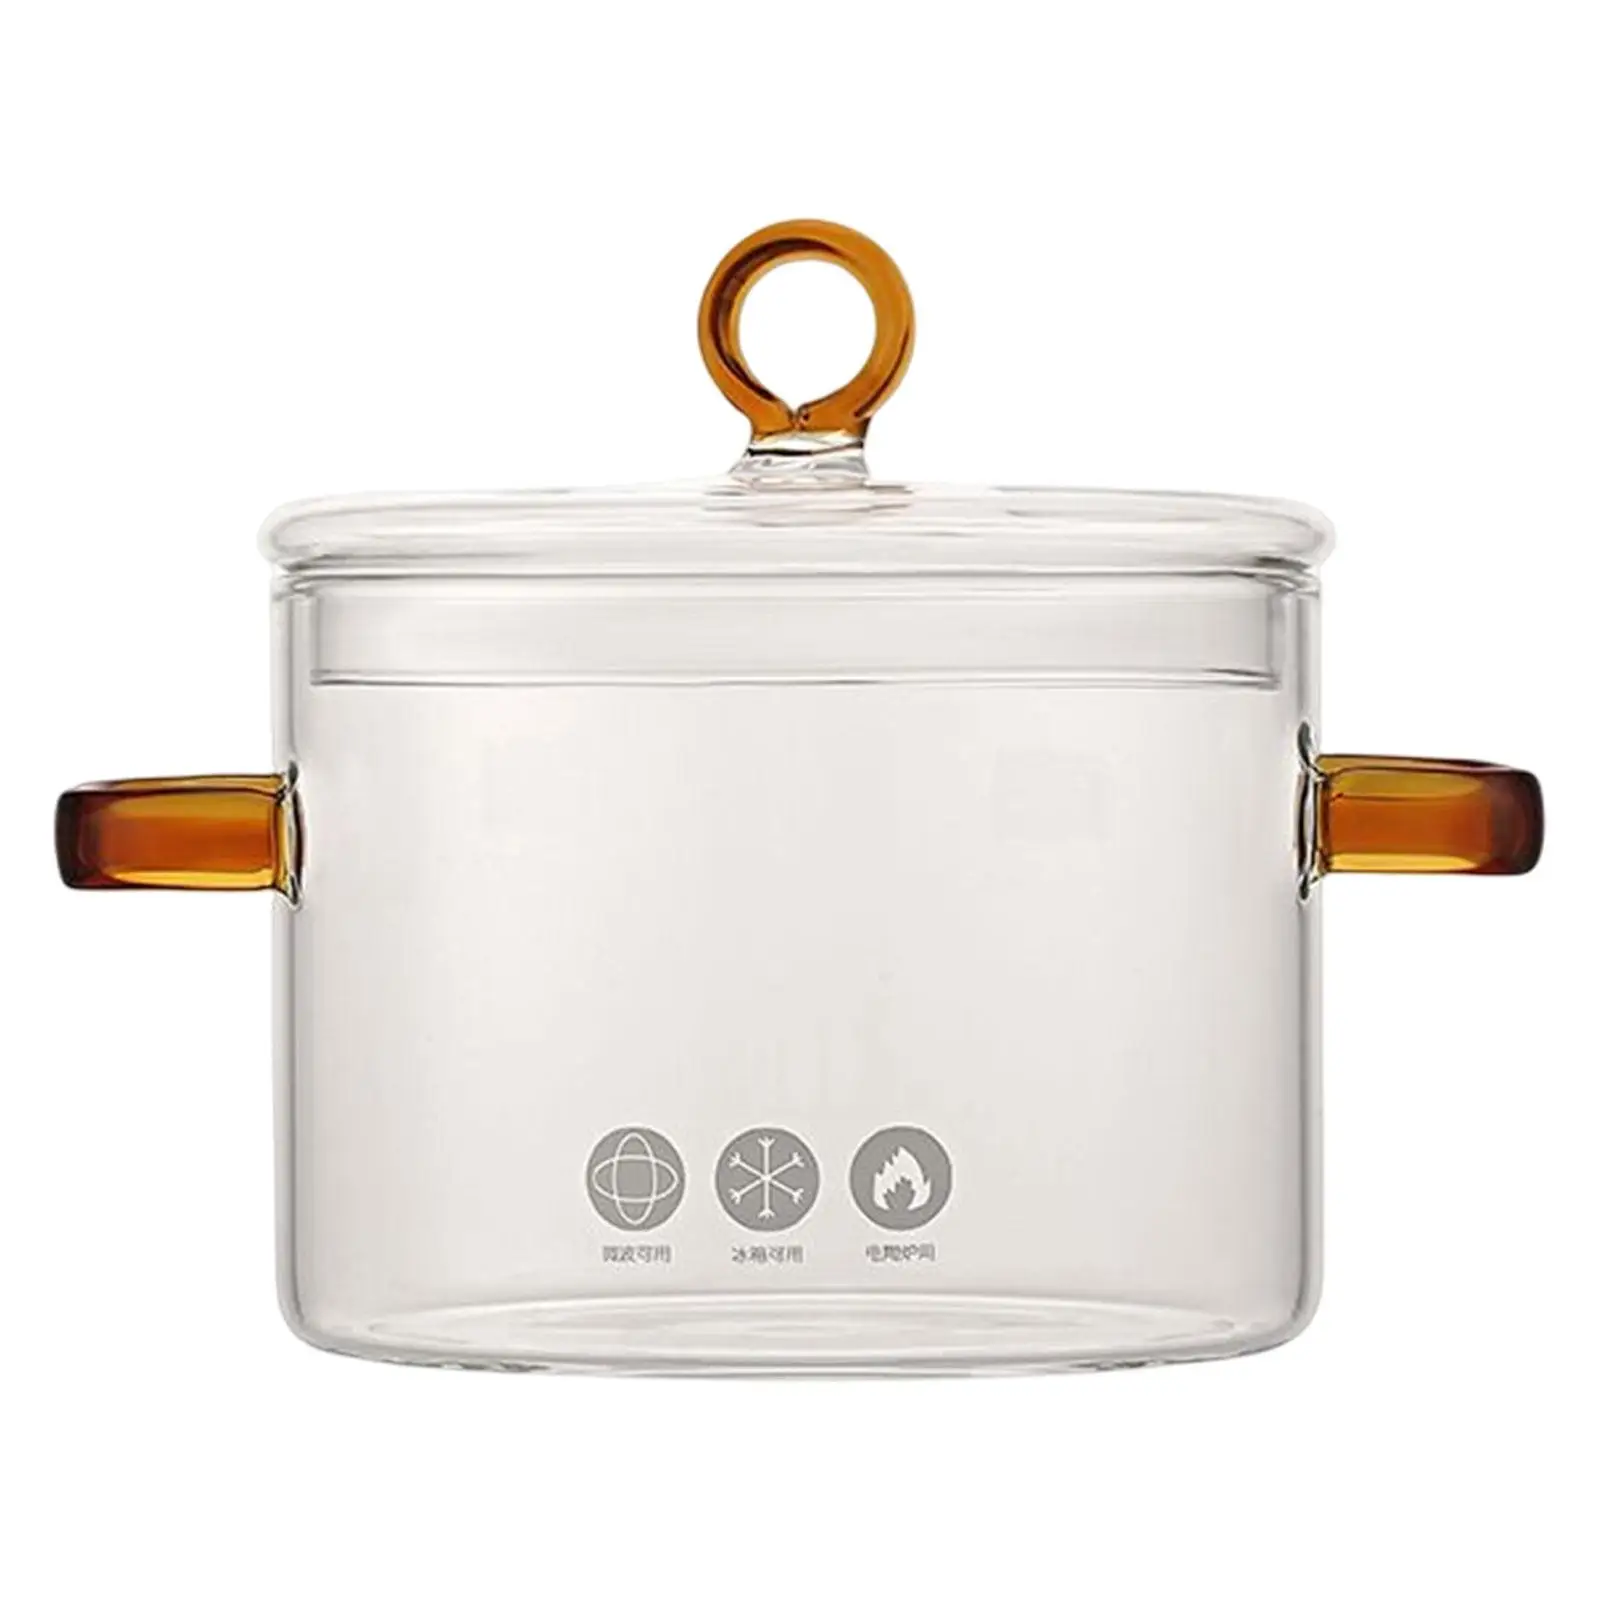 Glass Stovetop Pot with Cover Mini Size Cookware Transparent Stew Pot for Food Pasta Noodle